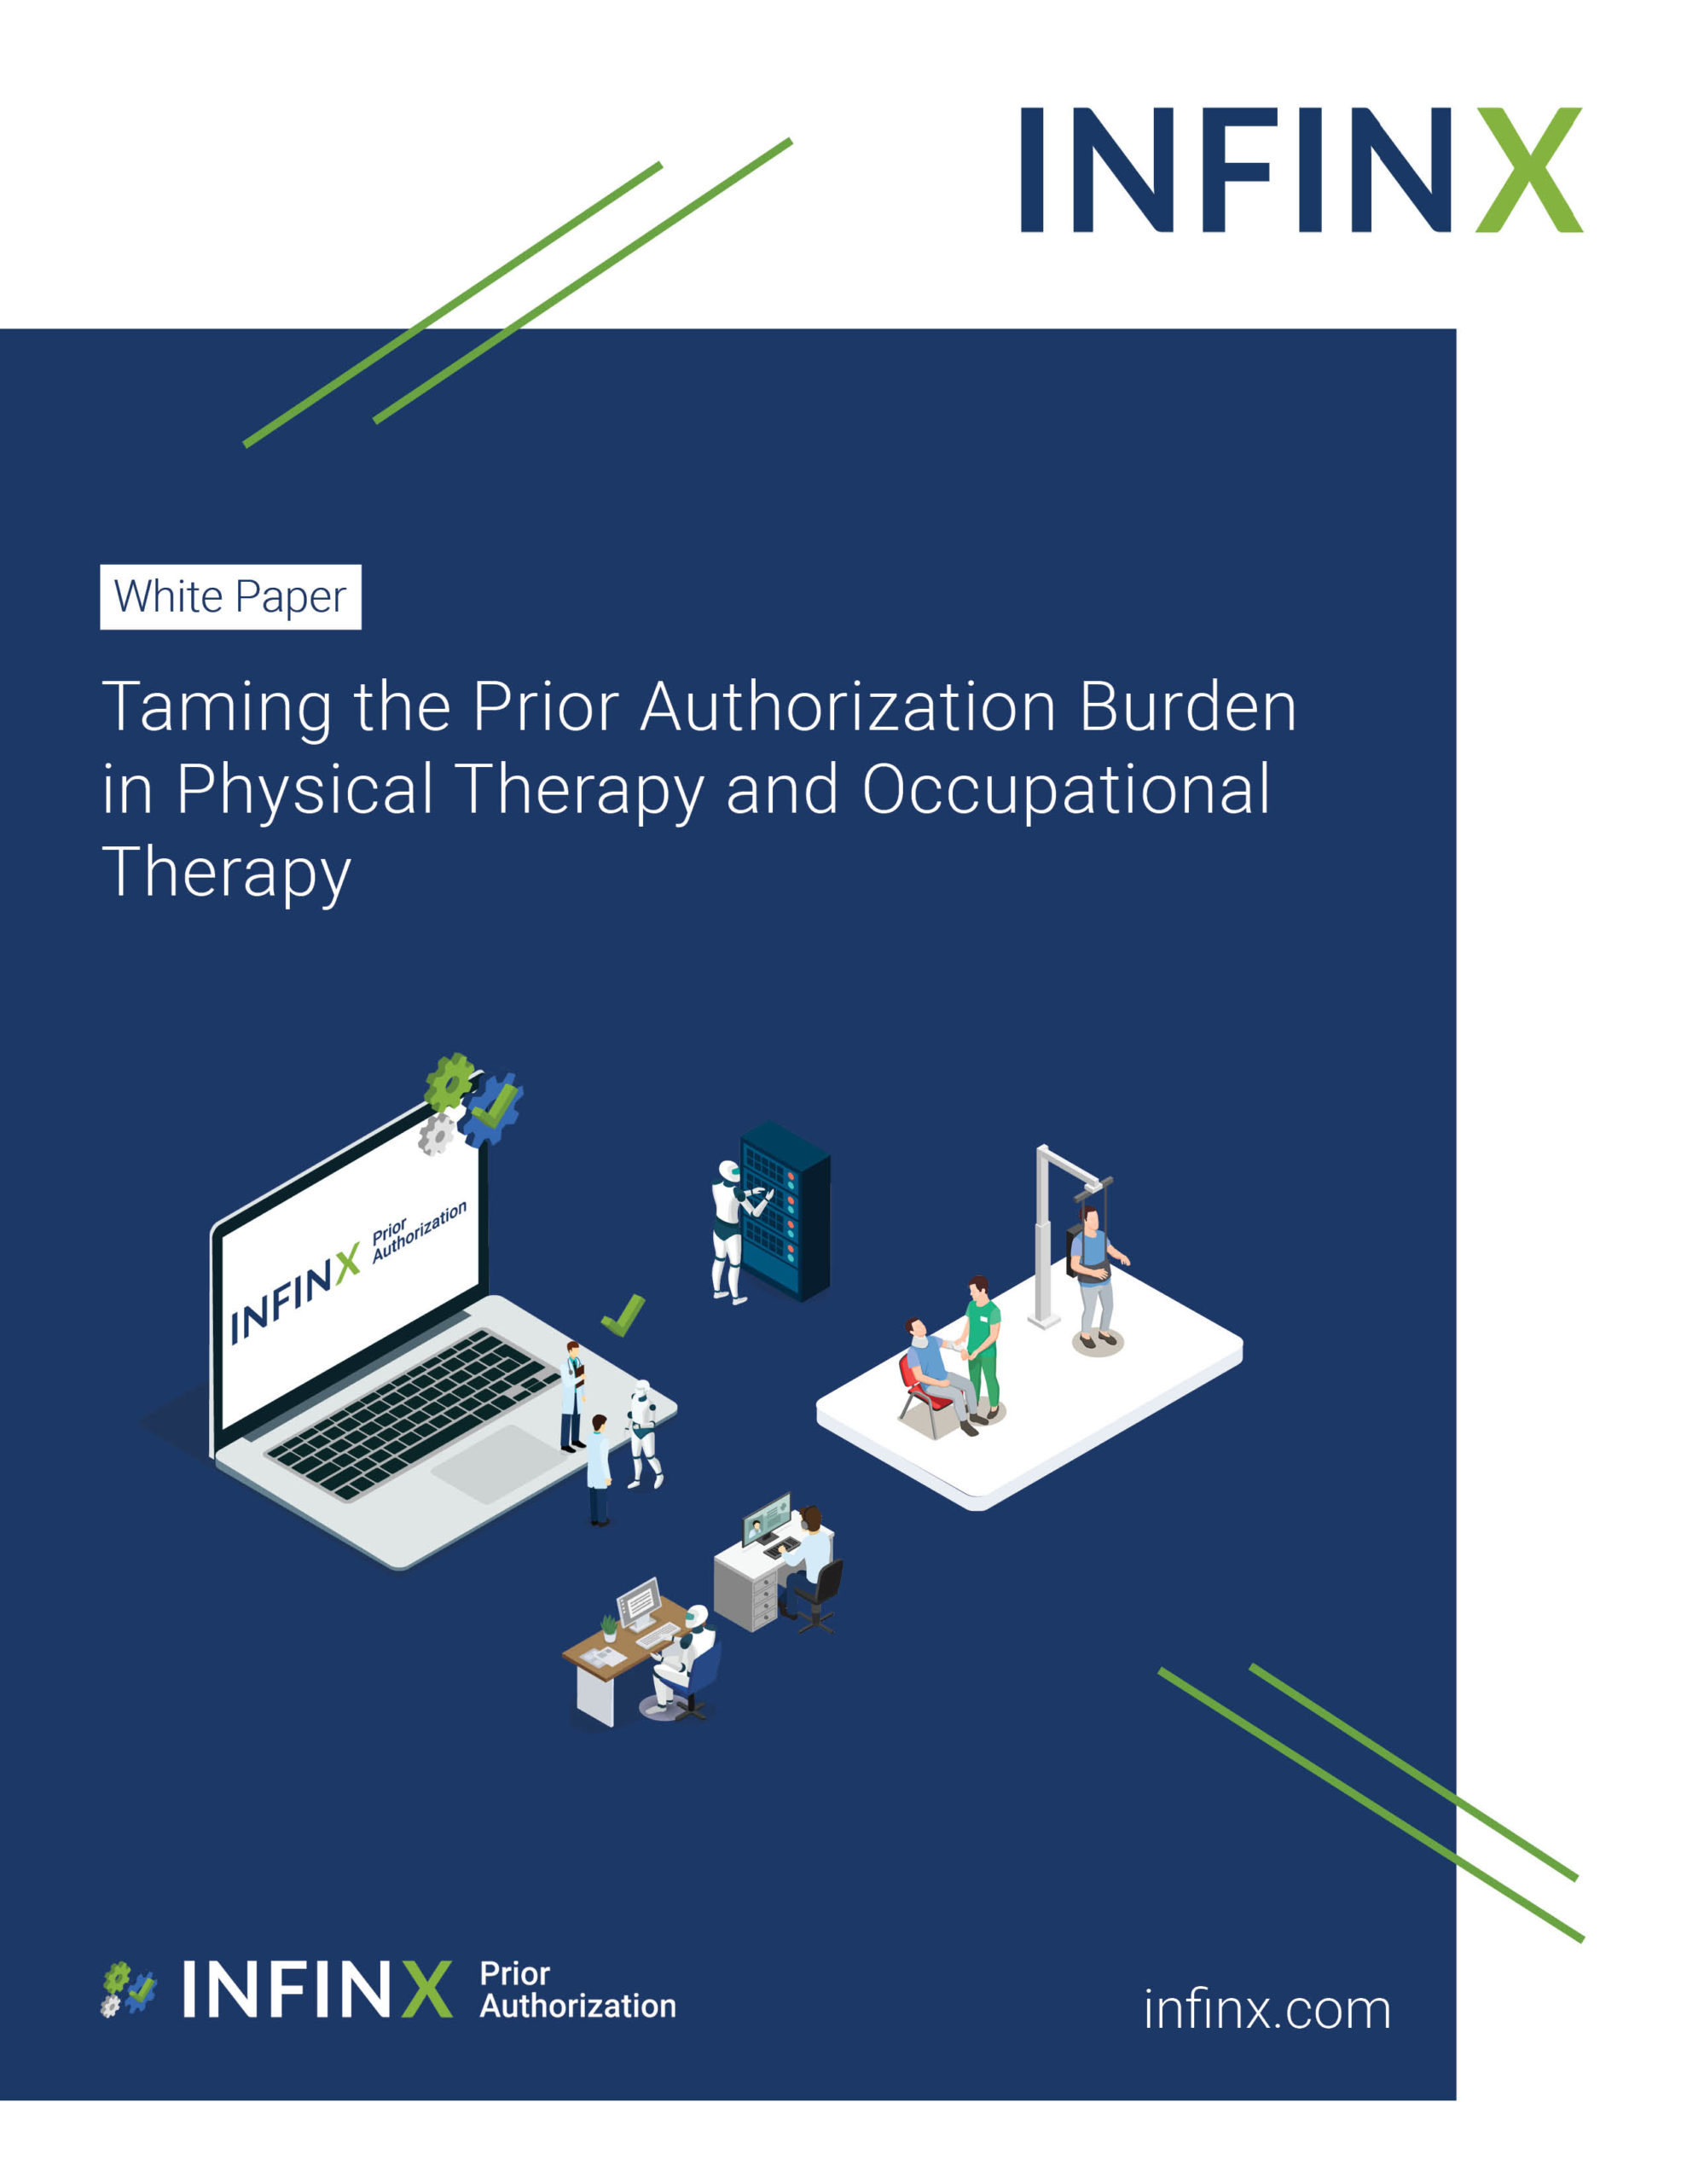 Infinx - White Paper - Taming the Prior Authorization Burden in Physical Therapy and Occupational Therapy June2021 1